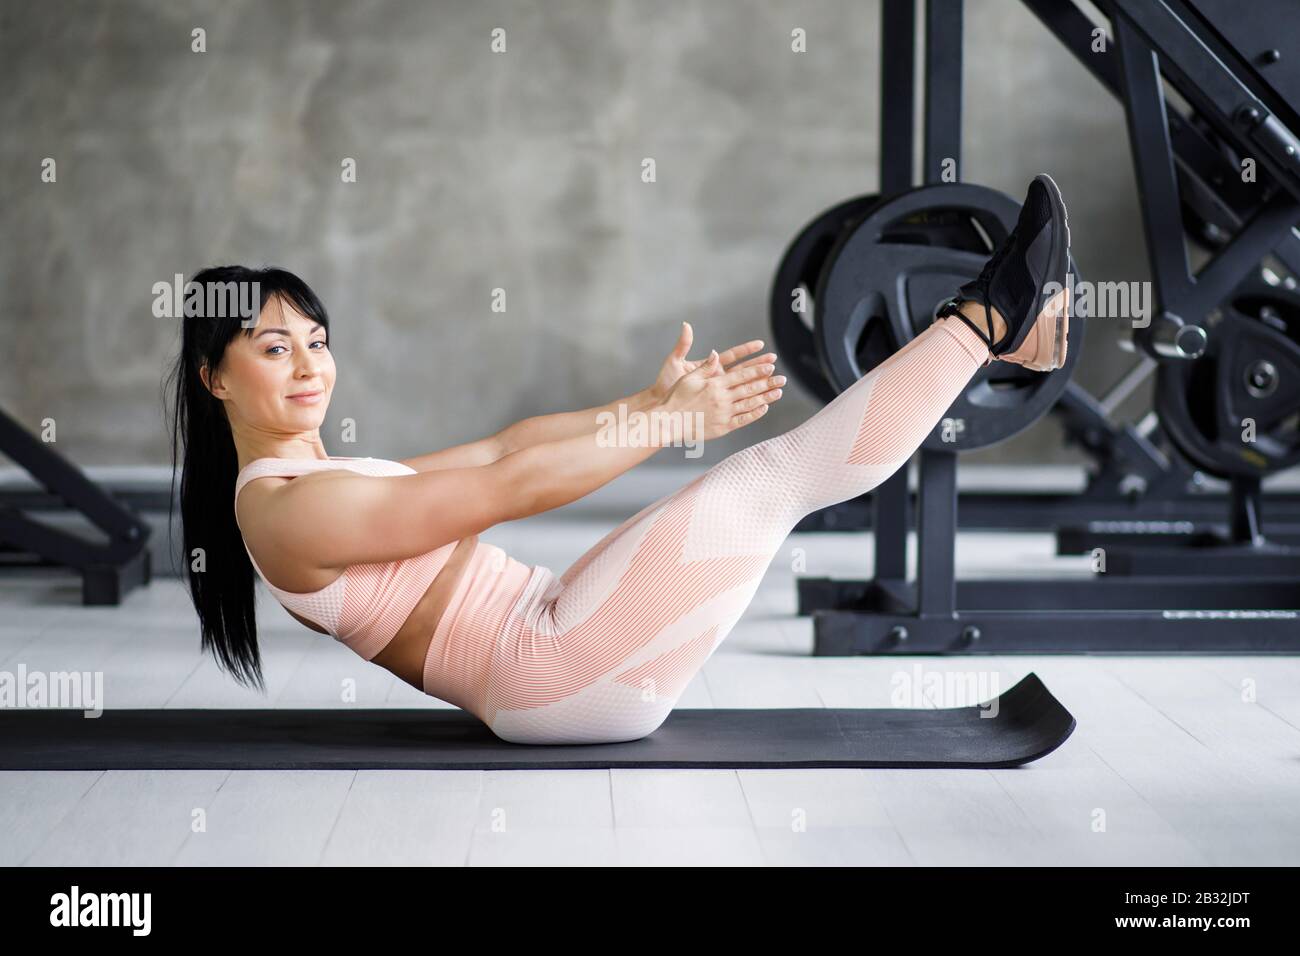 Young pretty woman, middle-aged, well-built physique, performs exercises on the press. Active lifestyle Stock Photo